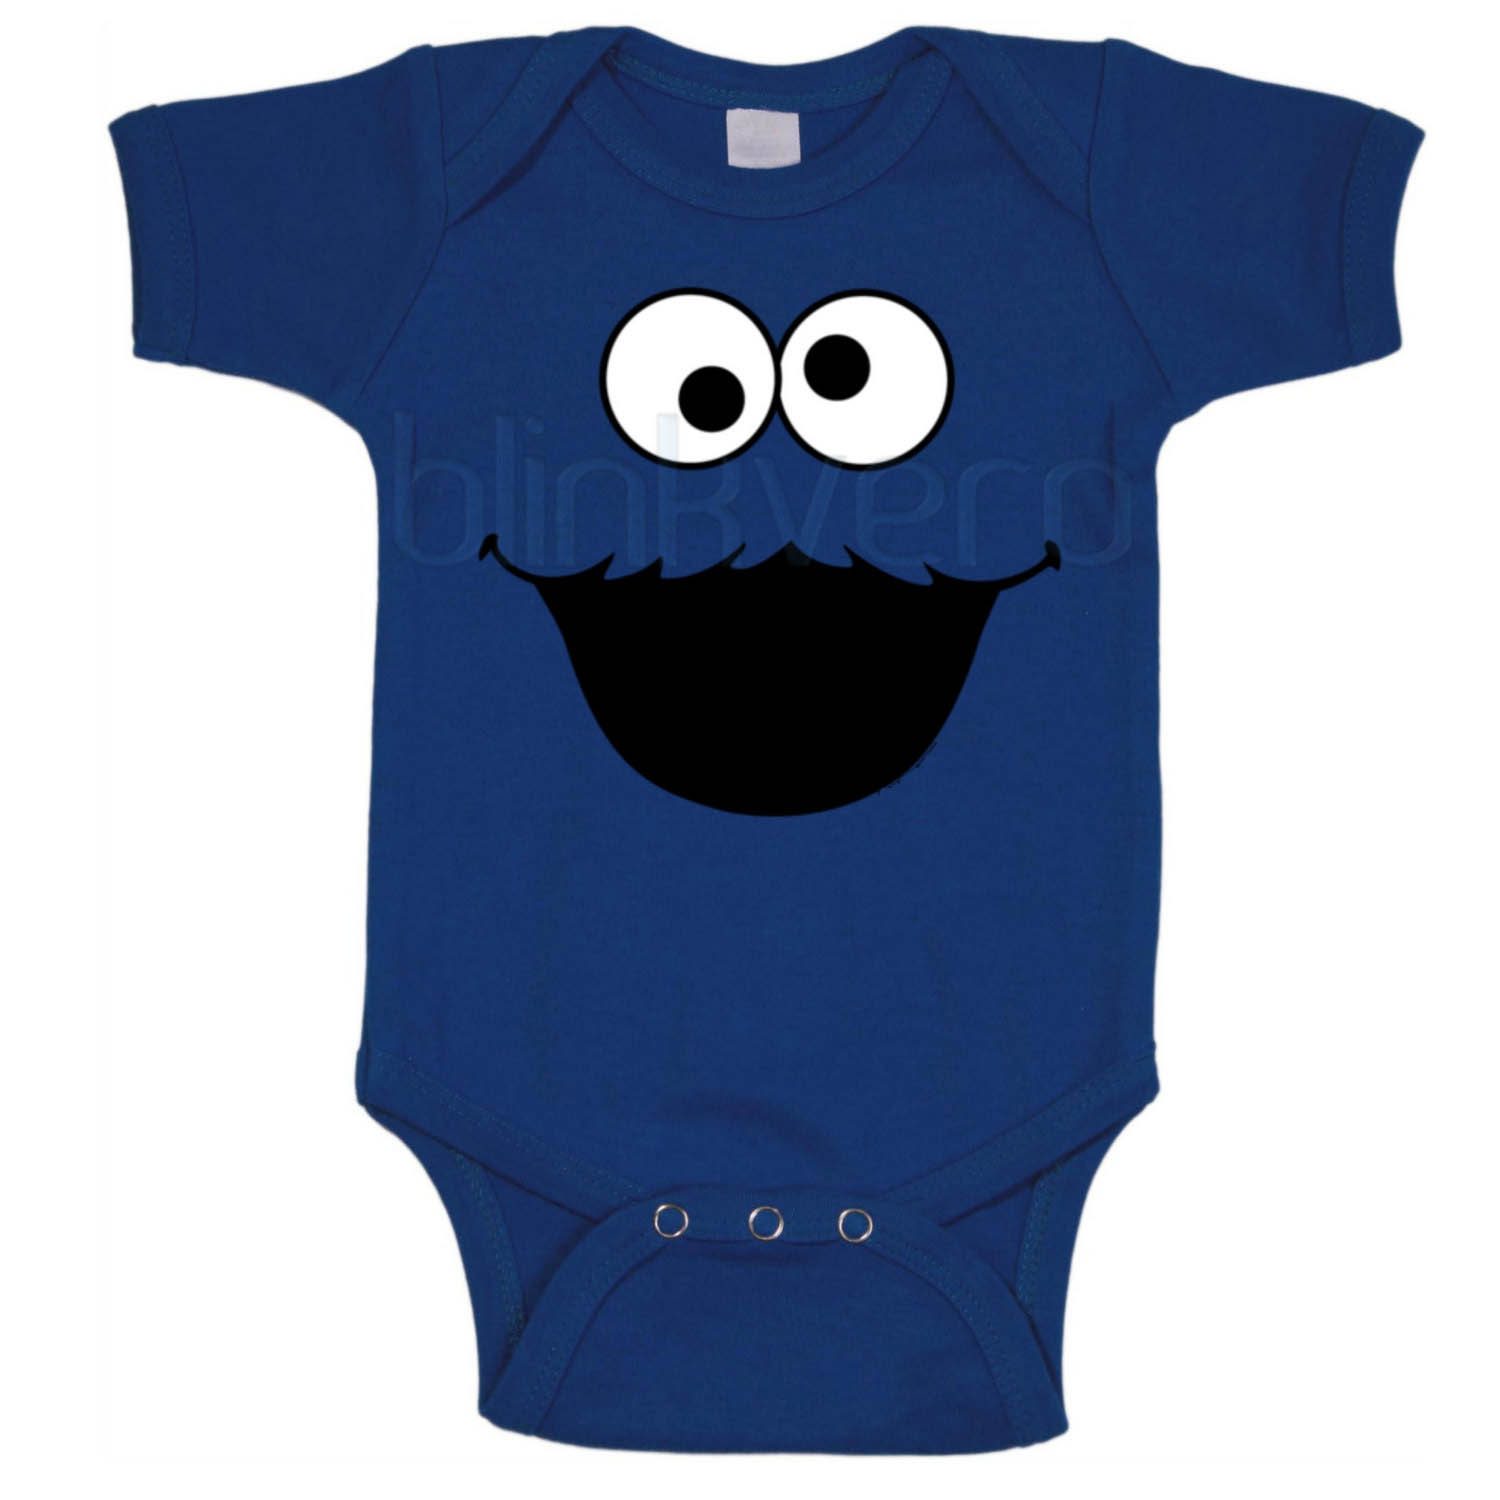 Cookie Monster Awesome Baby Onesie Unisex Cute all size boy girl